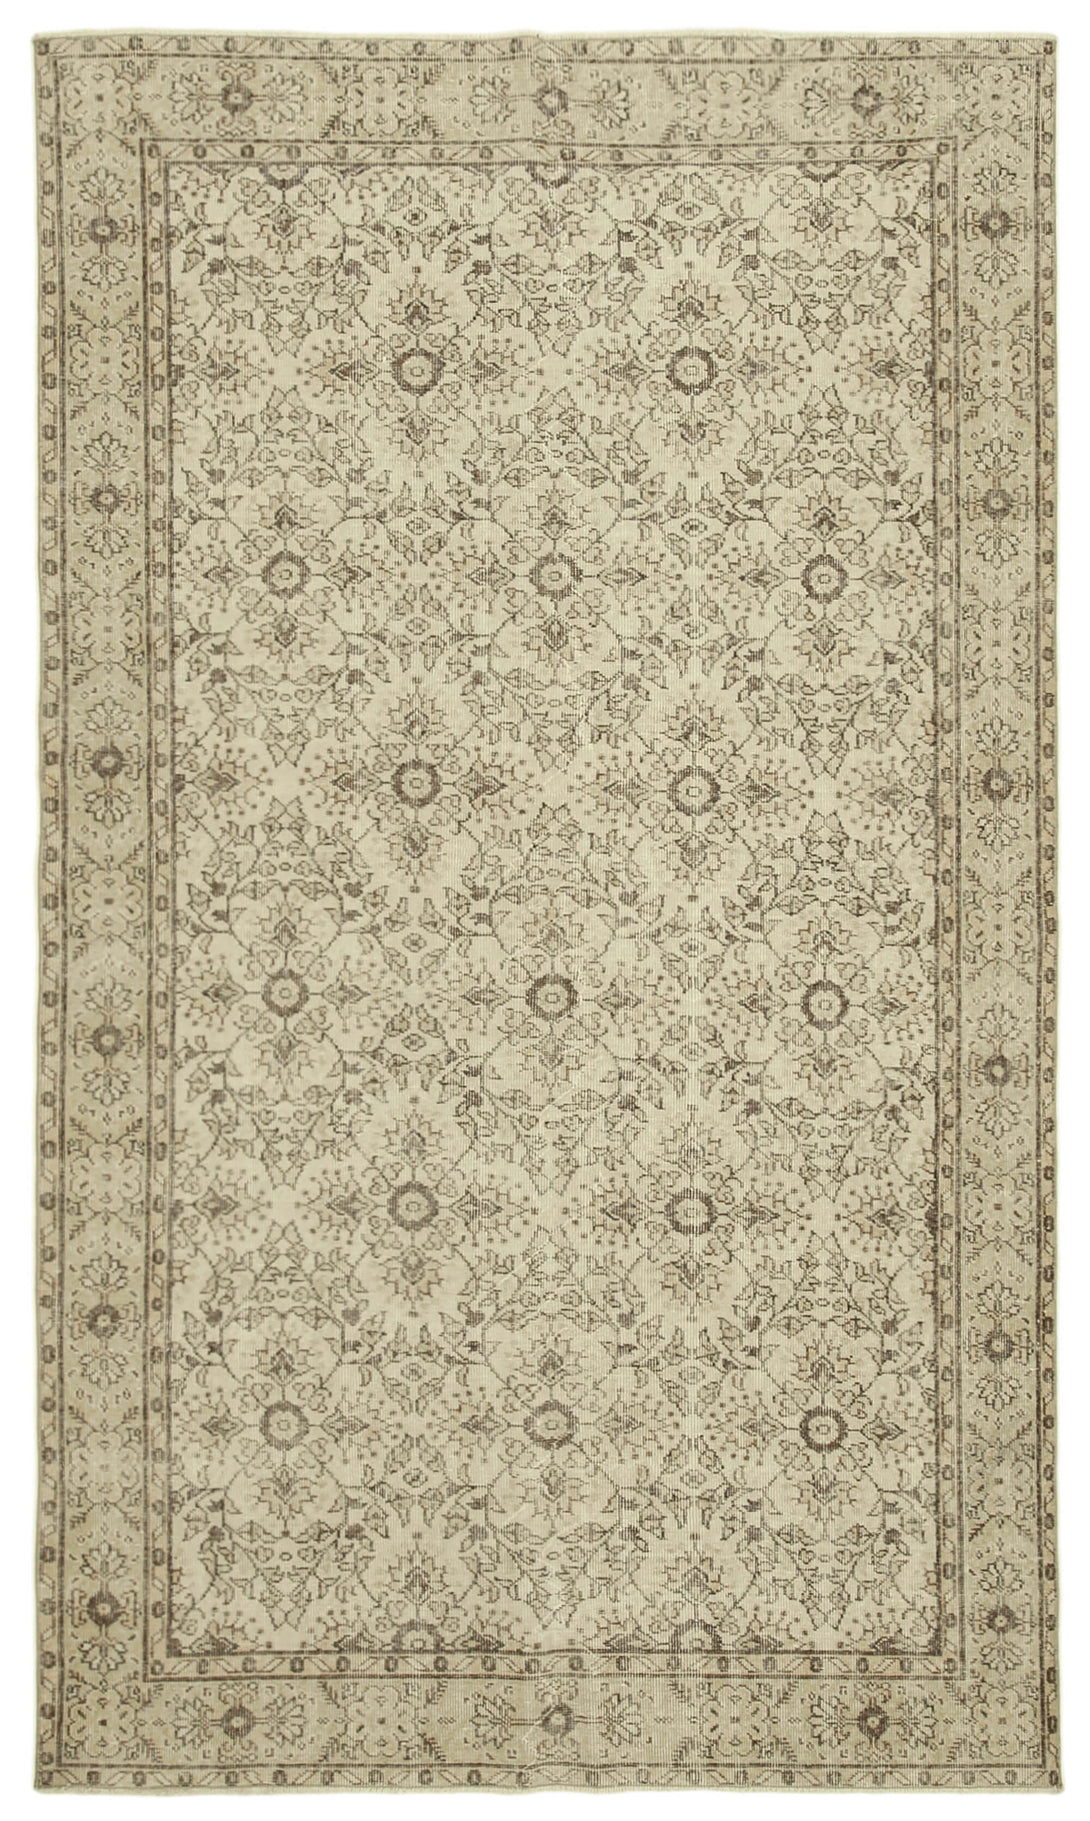 Handmade White Wash Area Rug > Design# OL-AC-39311 > Size: 5'-10" x 9'-9", Carpet Culture Rugs, Handmade Rugs, NYC Rugs, New Rugs, Shop Rugs, Rug Store, Outlet Rugs, SoHo Rugs, Rugs in USA